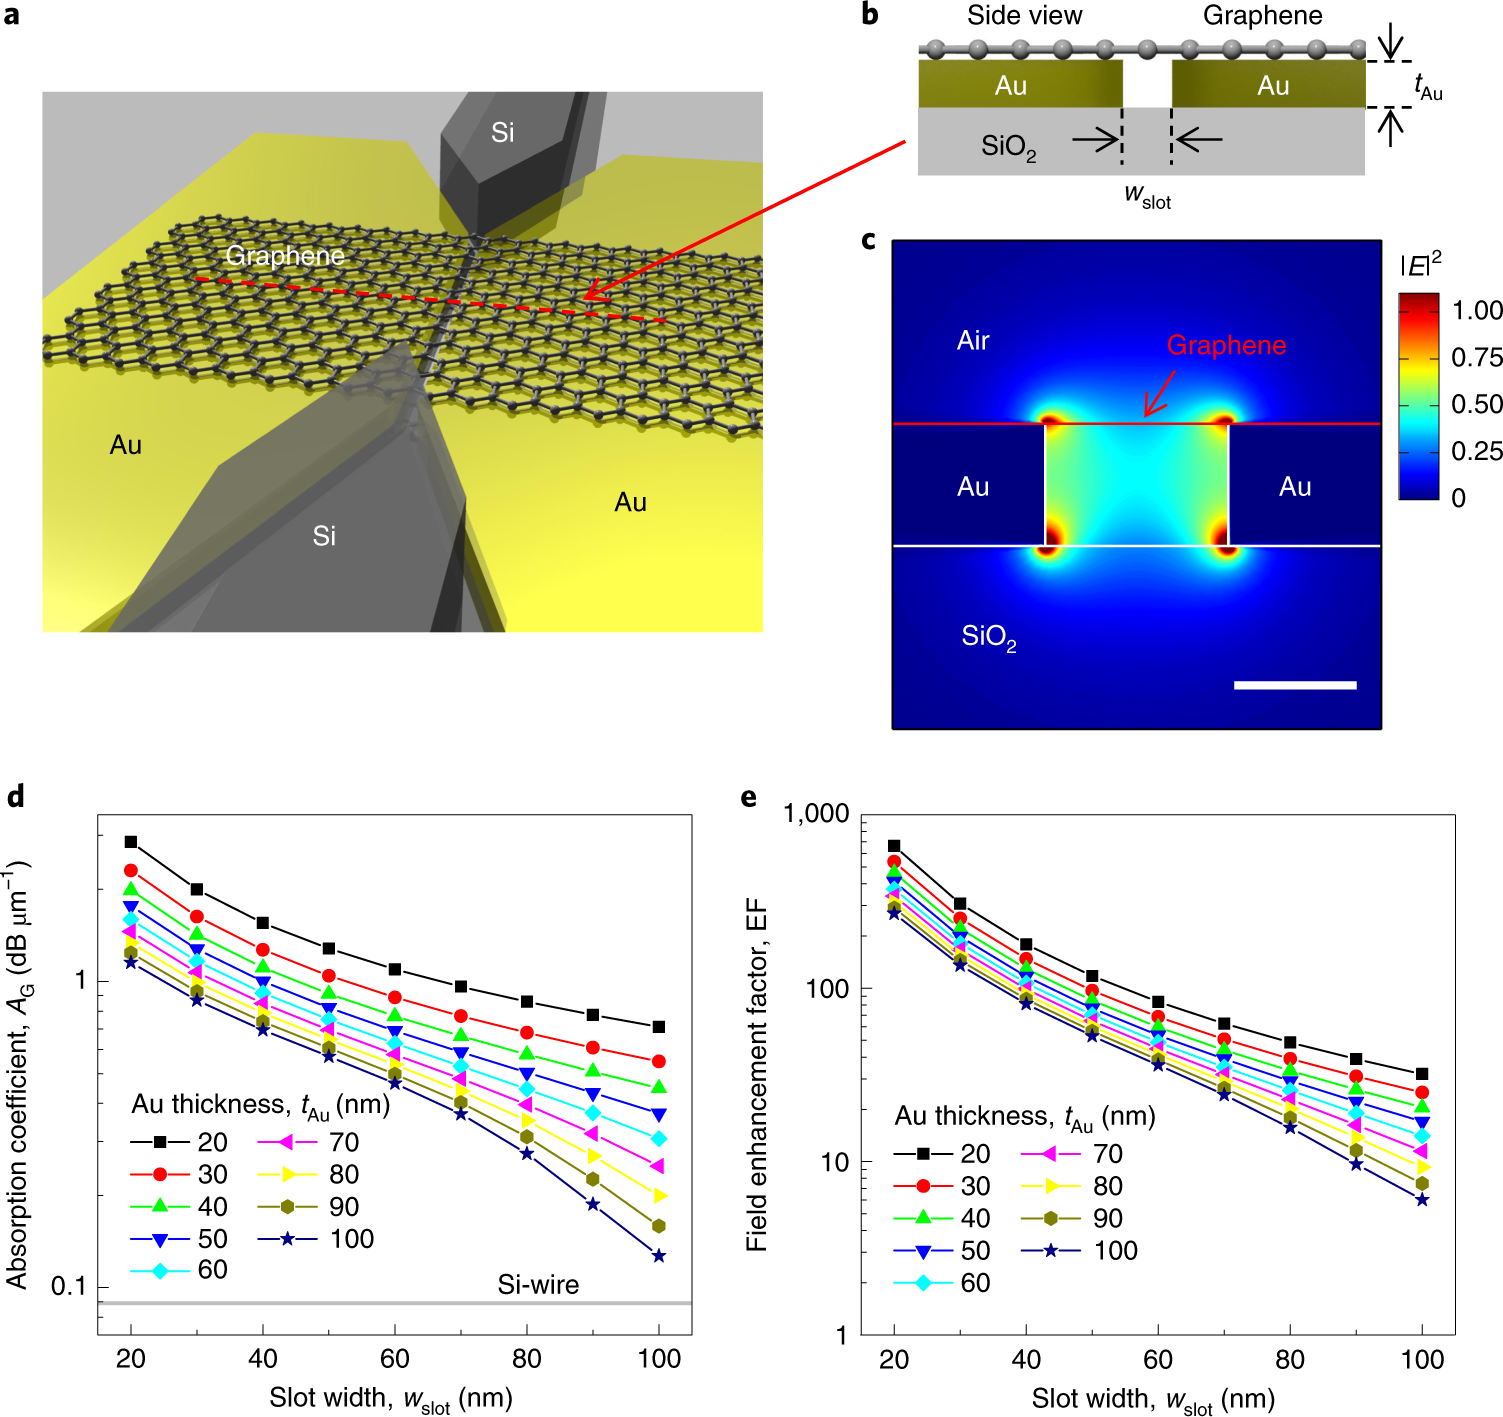 Ultrafast and energy-efficient all-optical with graphene-loaded plasmonic waveguides | Nature